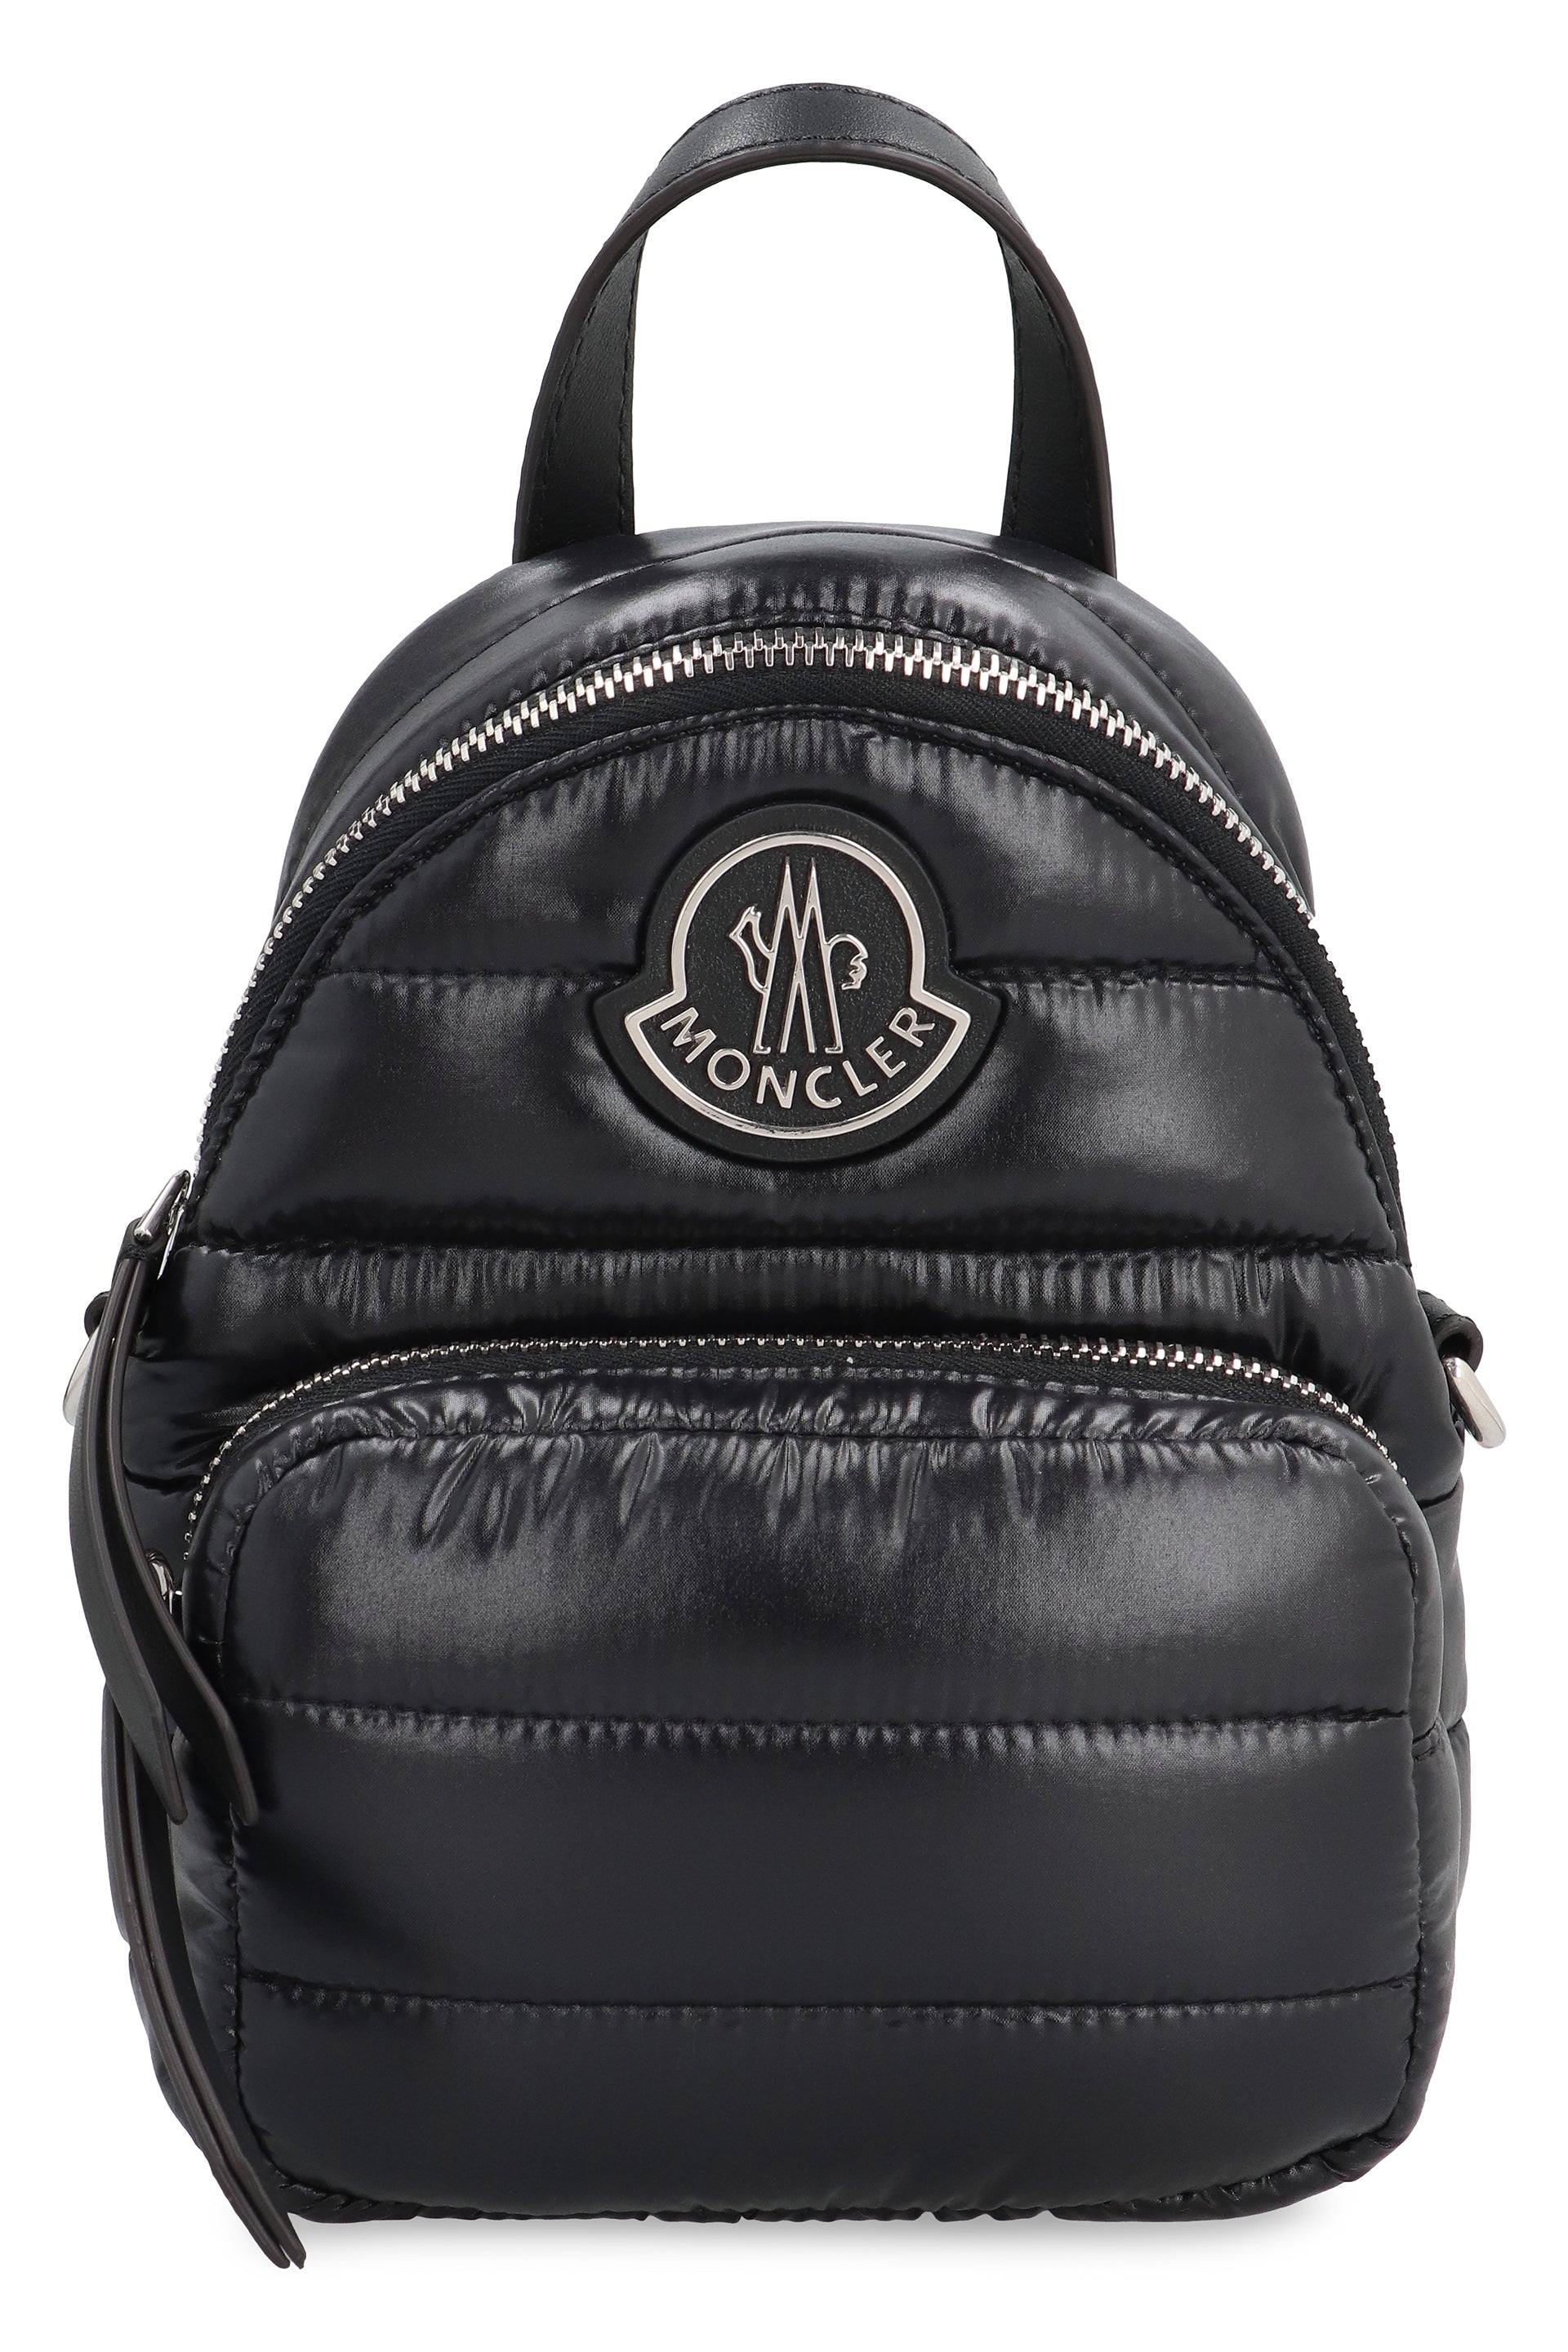 Shop Moncler Padded Nylon Crossbody Handbag With Leather Details And Removable Strap In Black